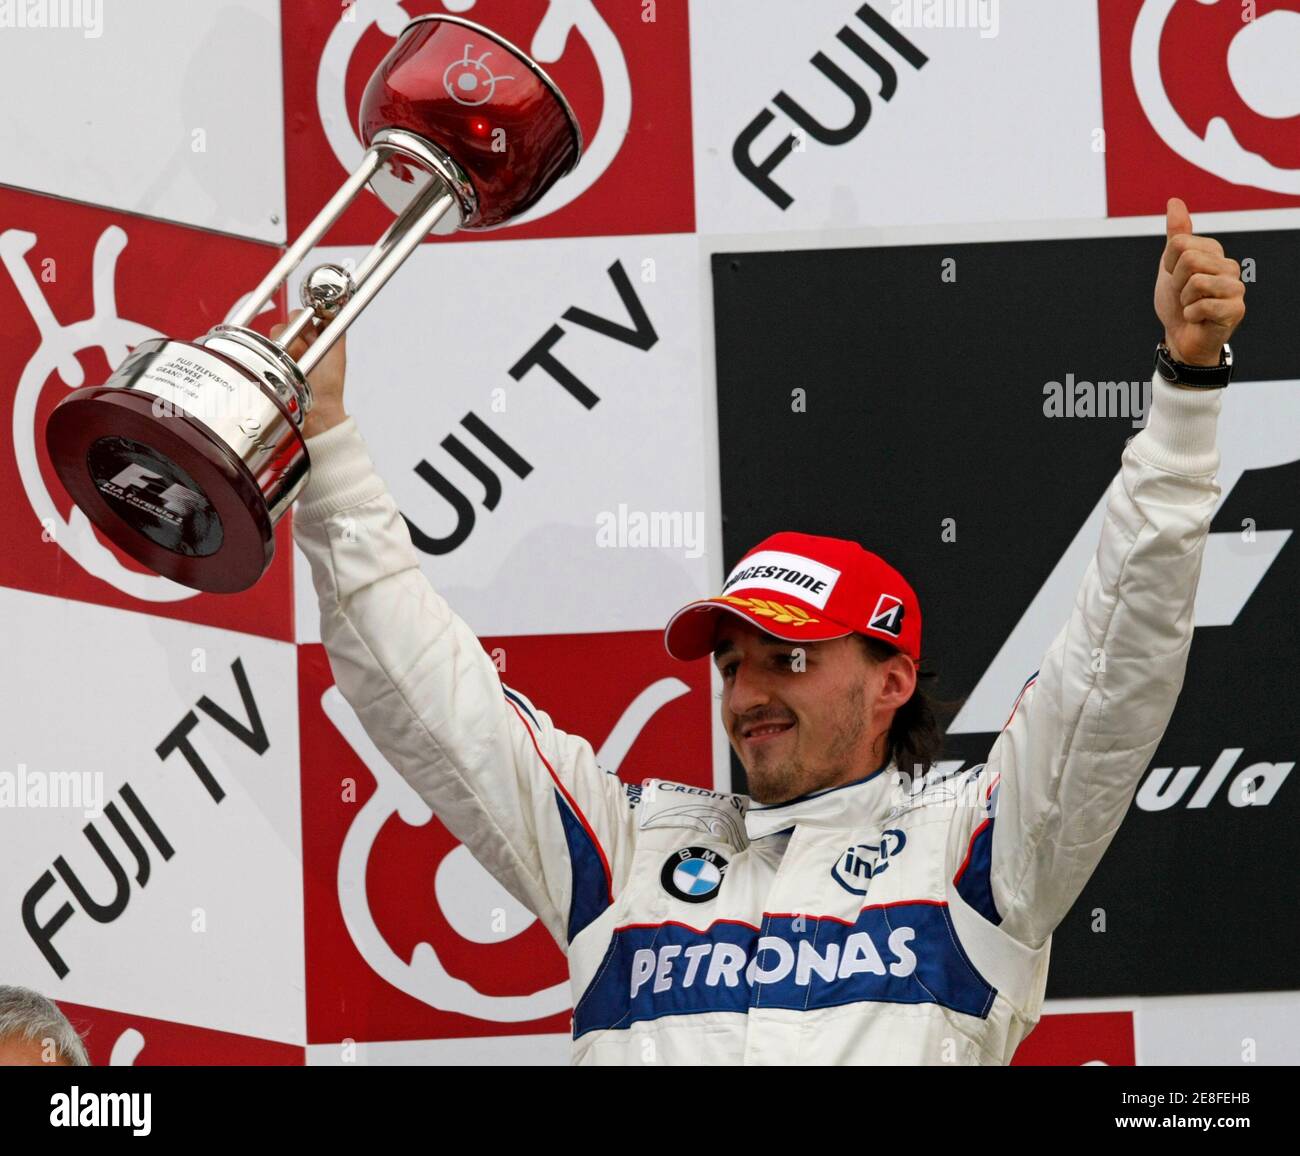 Bmw Sauber Formula One Driver Robert Kubica Of Poland Celebrates After Taking Second Place In The Japanese F1 Grand Prix At Fuji Speedway In Oyama Central Japan October 12 08 Reuters Issei Kato